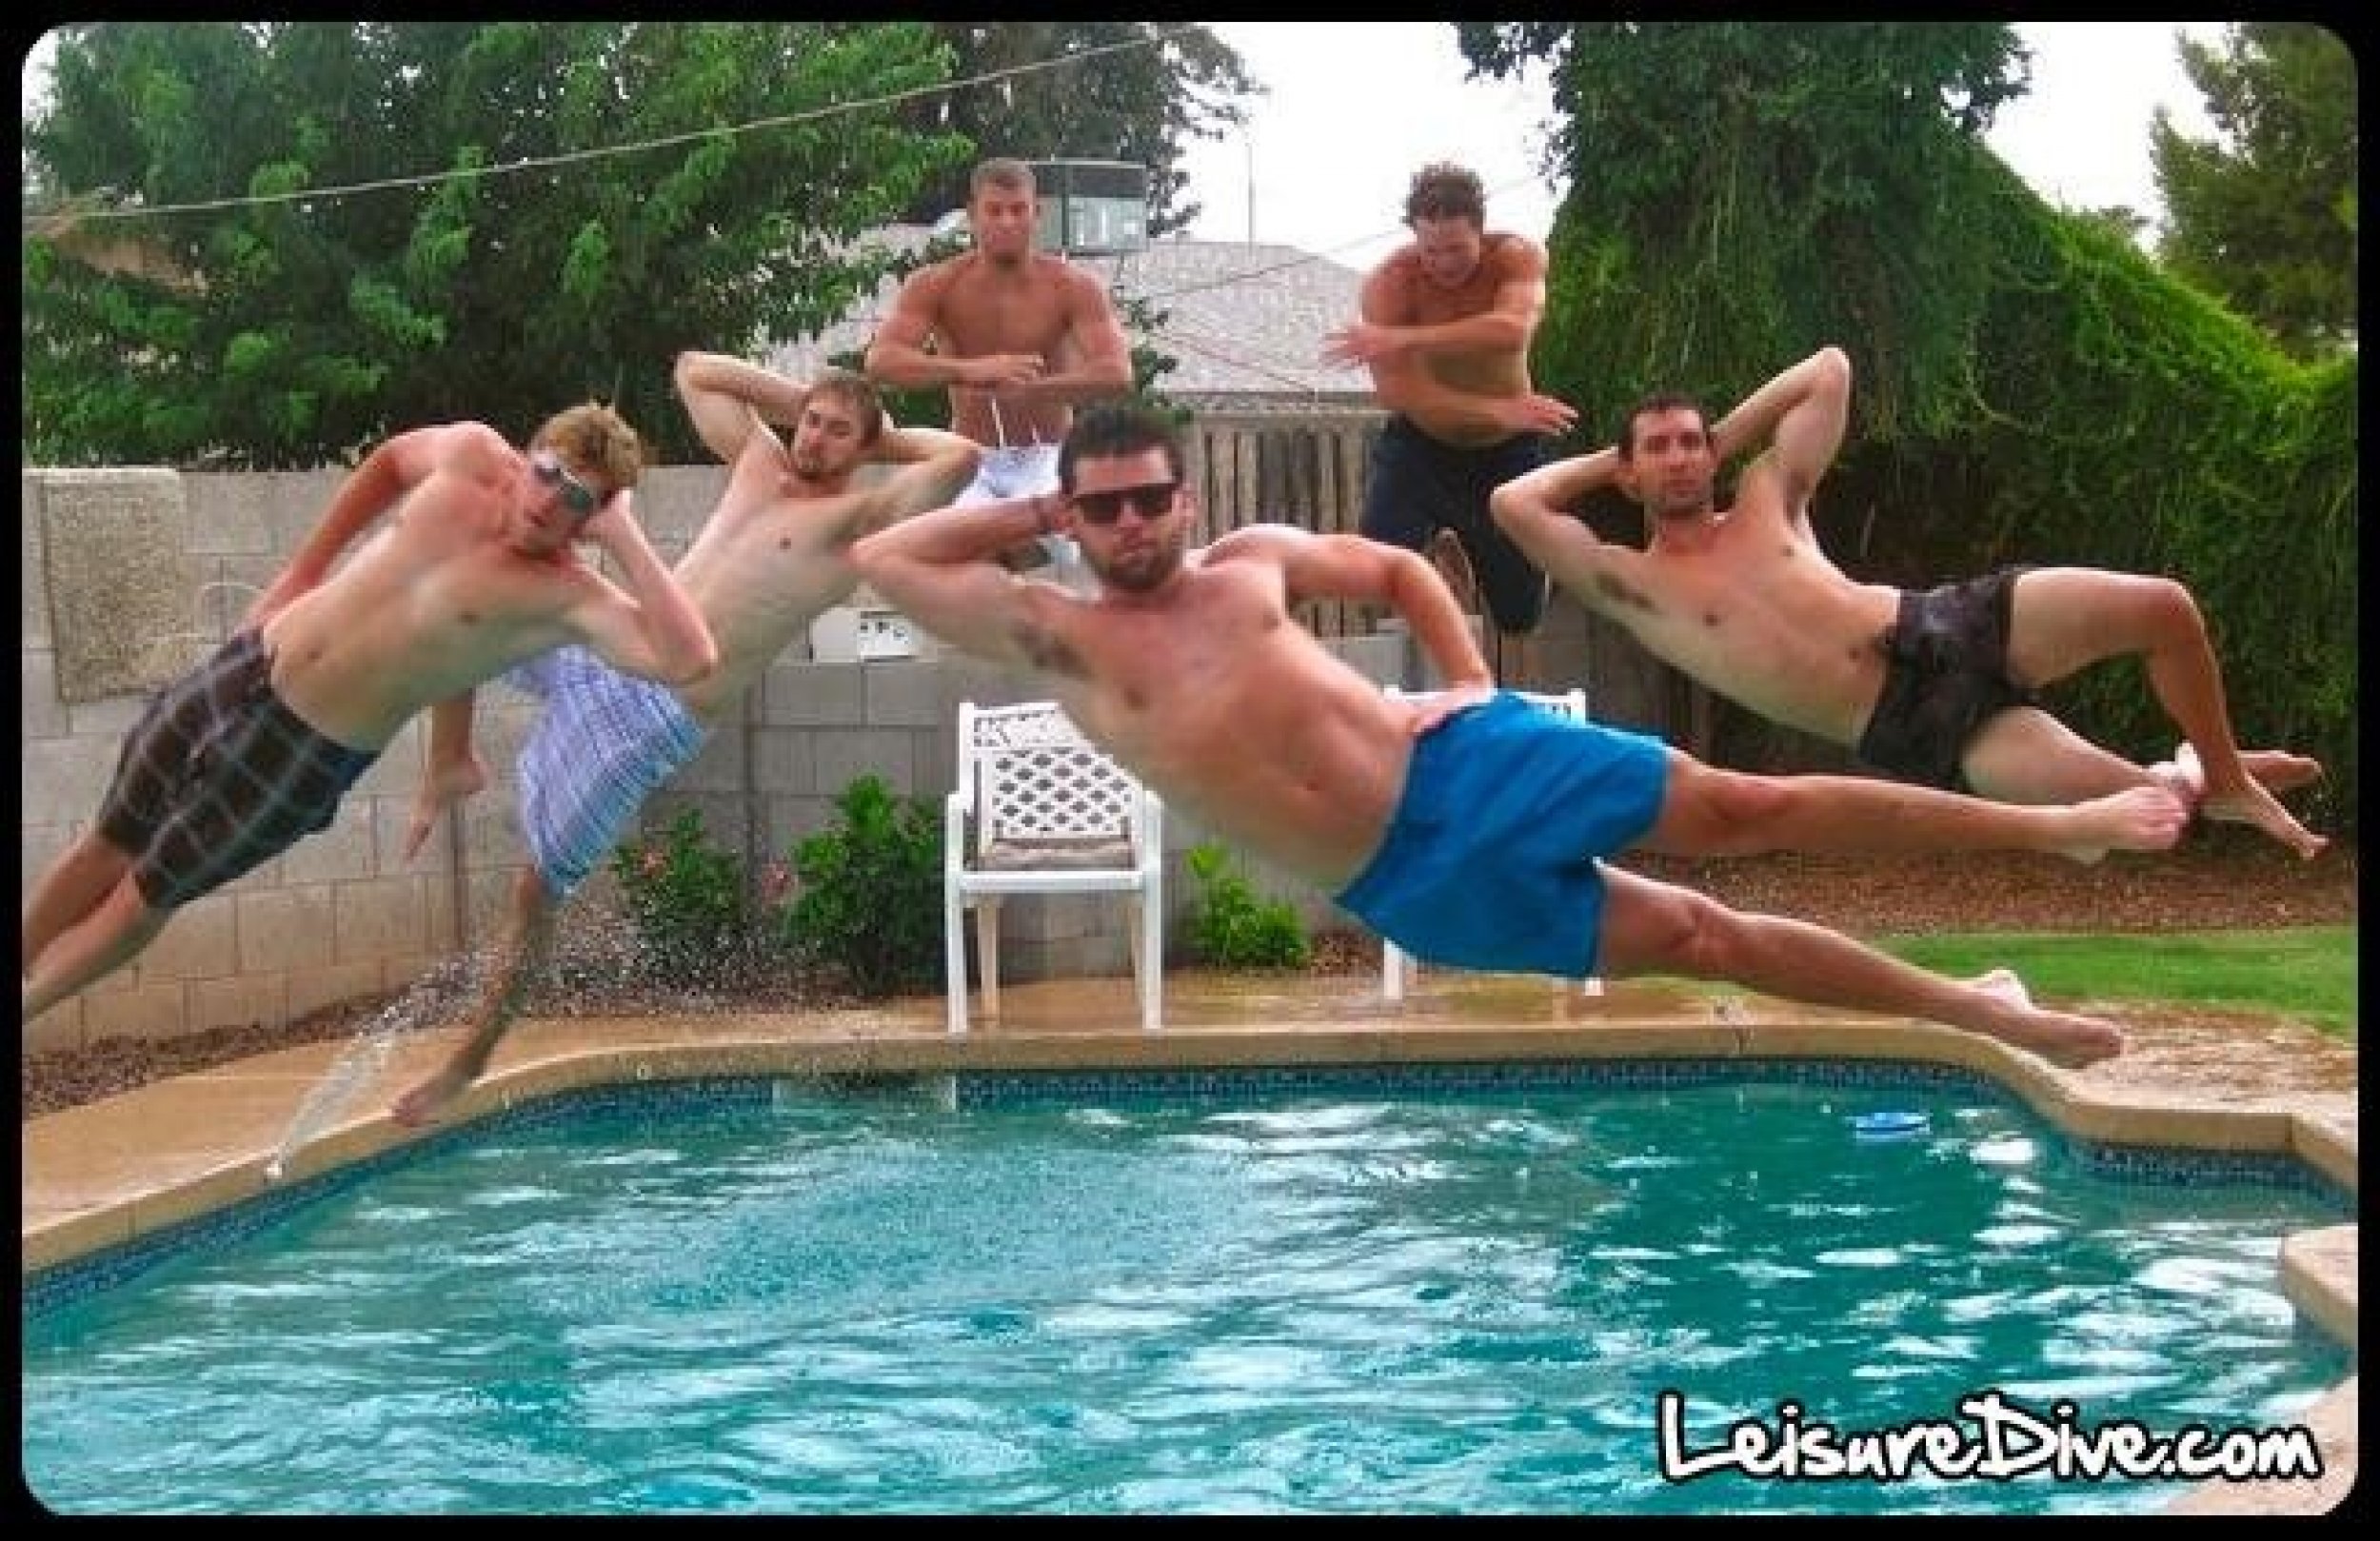 Leisure Diving Pictures Follow the Levitating Girl, Planking and Owling Craze